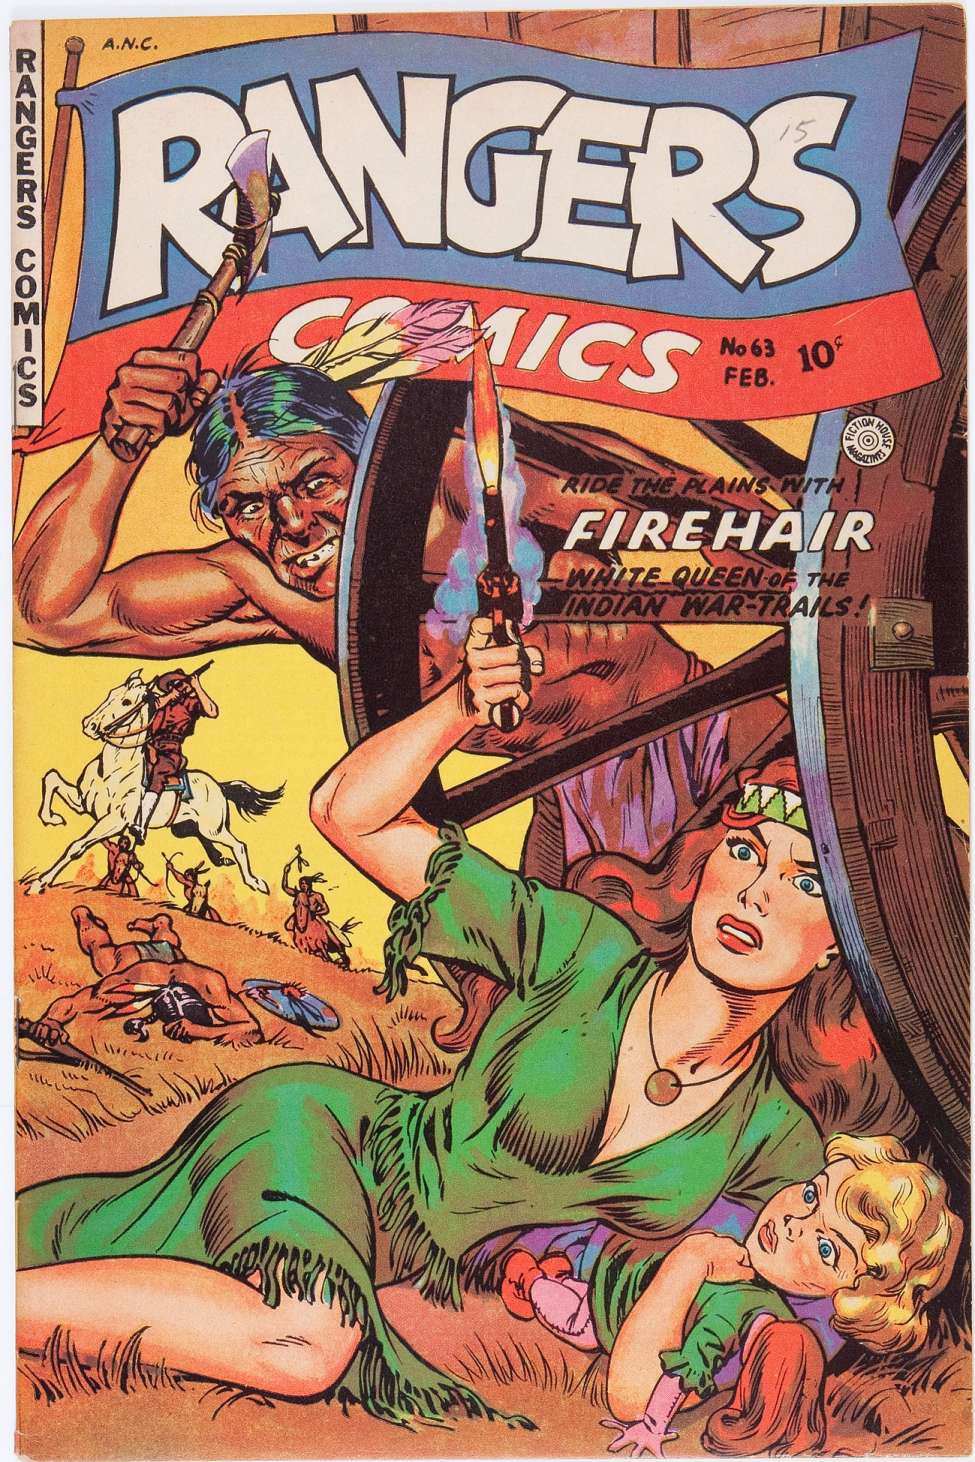 Book Cover For Rangers Comics 63